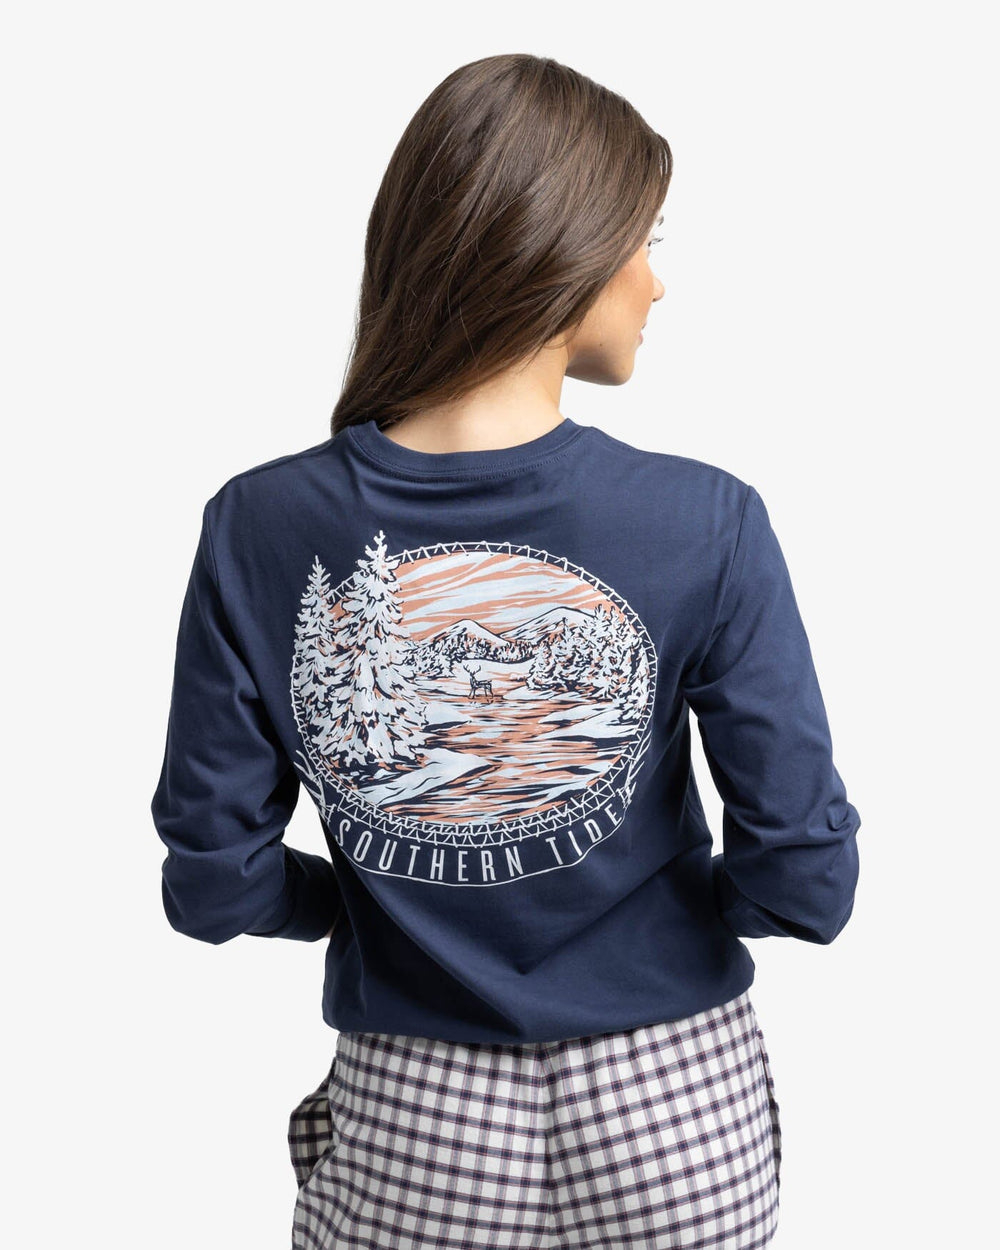 The back view of the Southern Tide Snowy Scene Long Sleeve T-Shirt by Southern Tide - True Navy